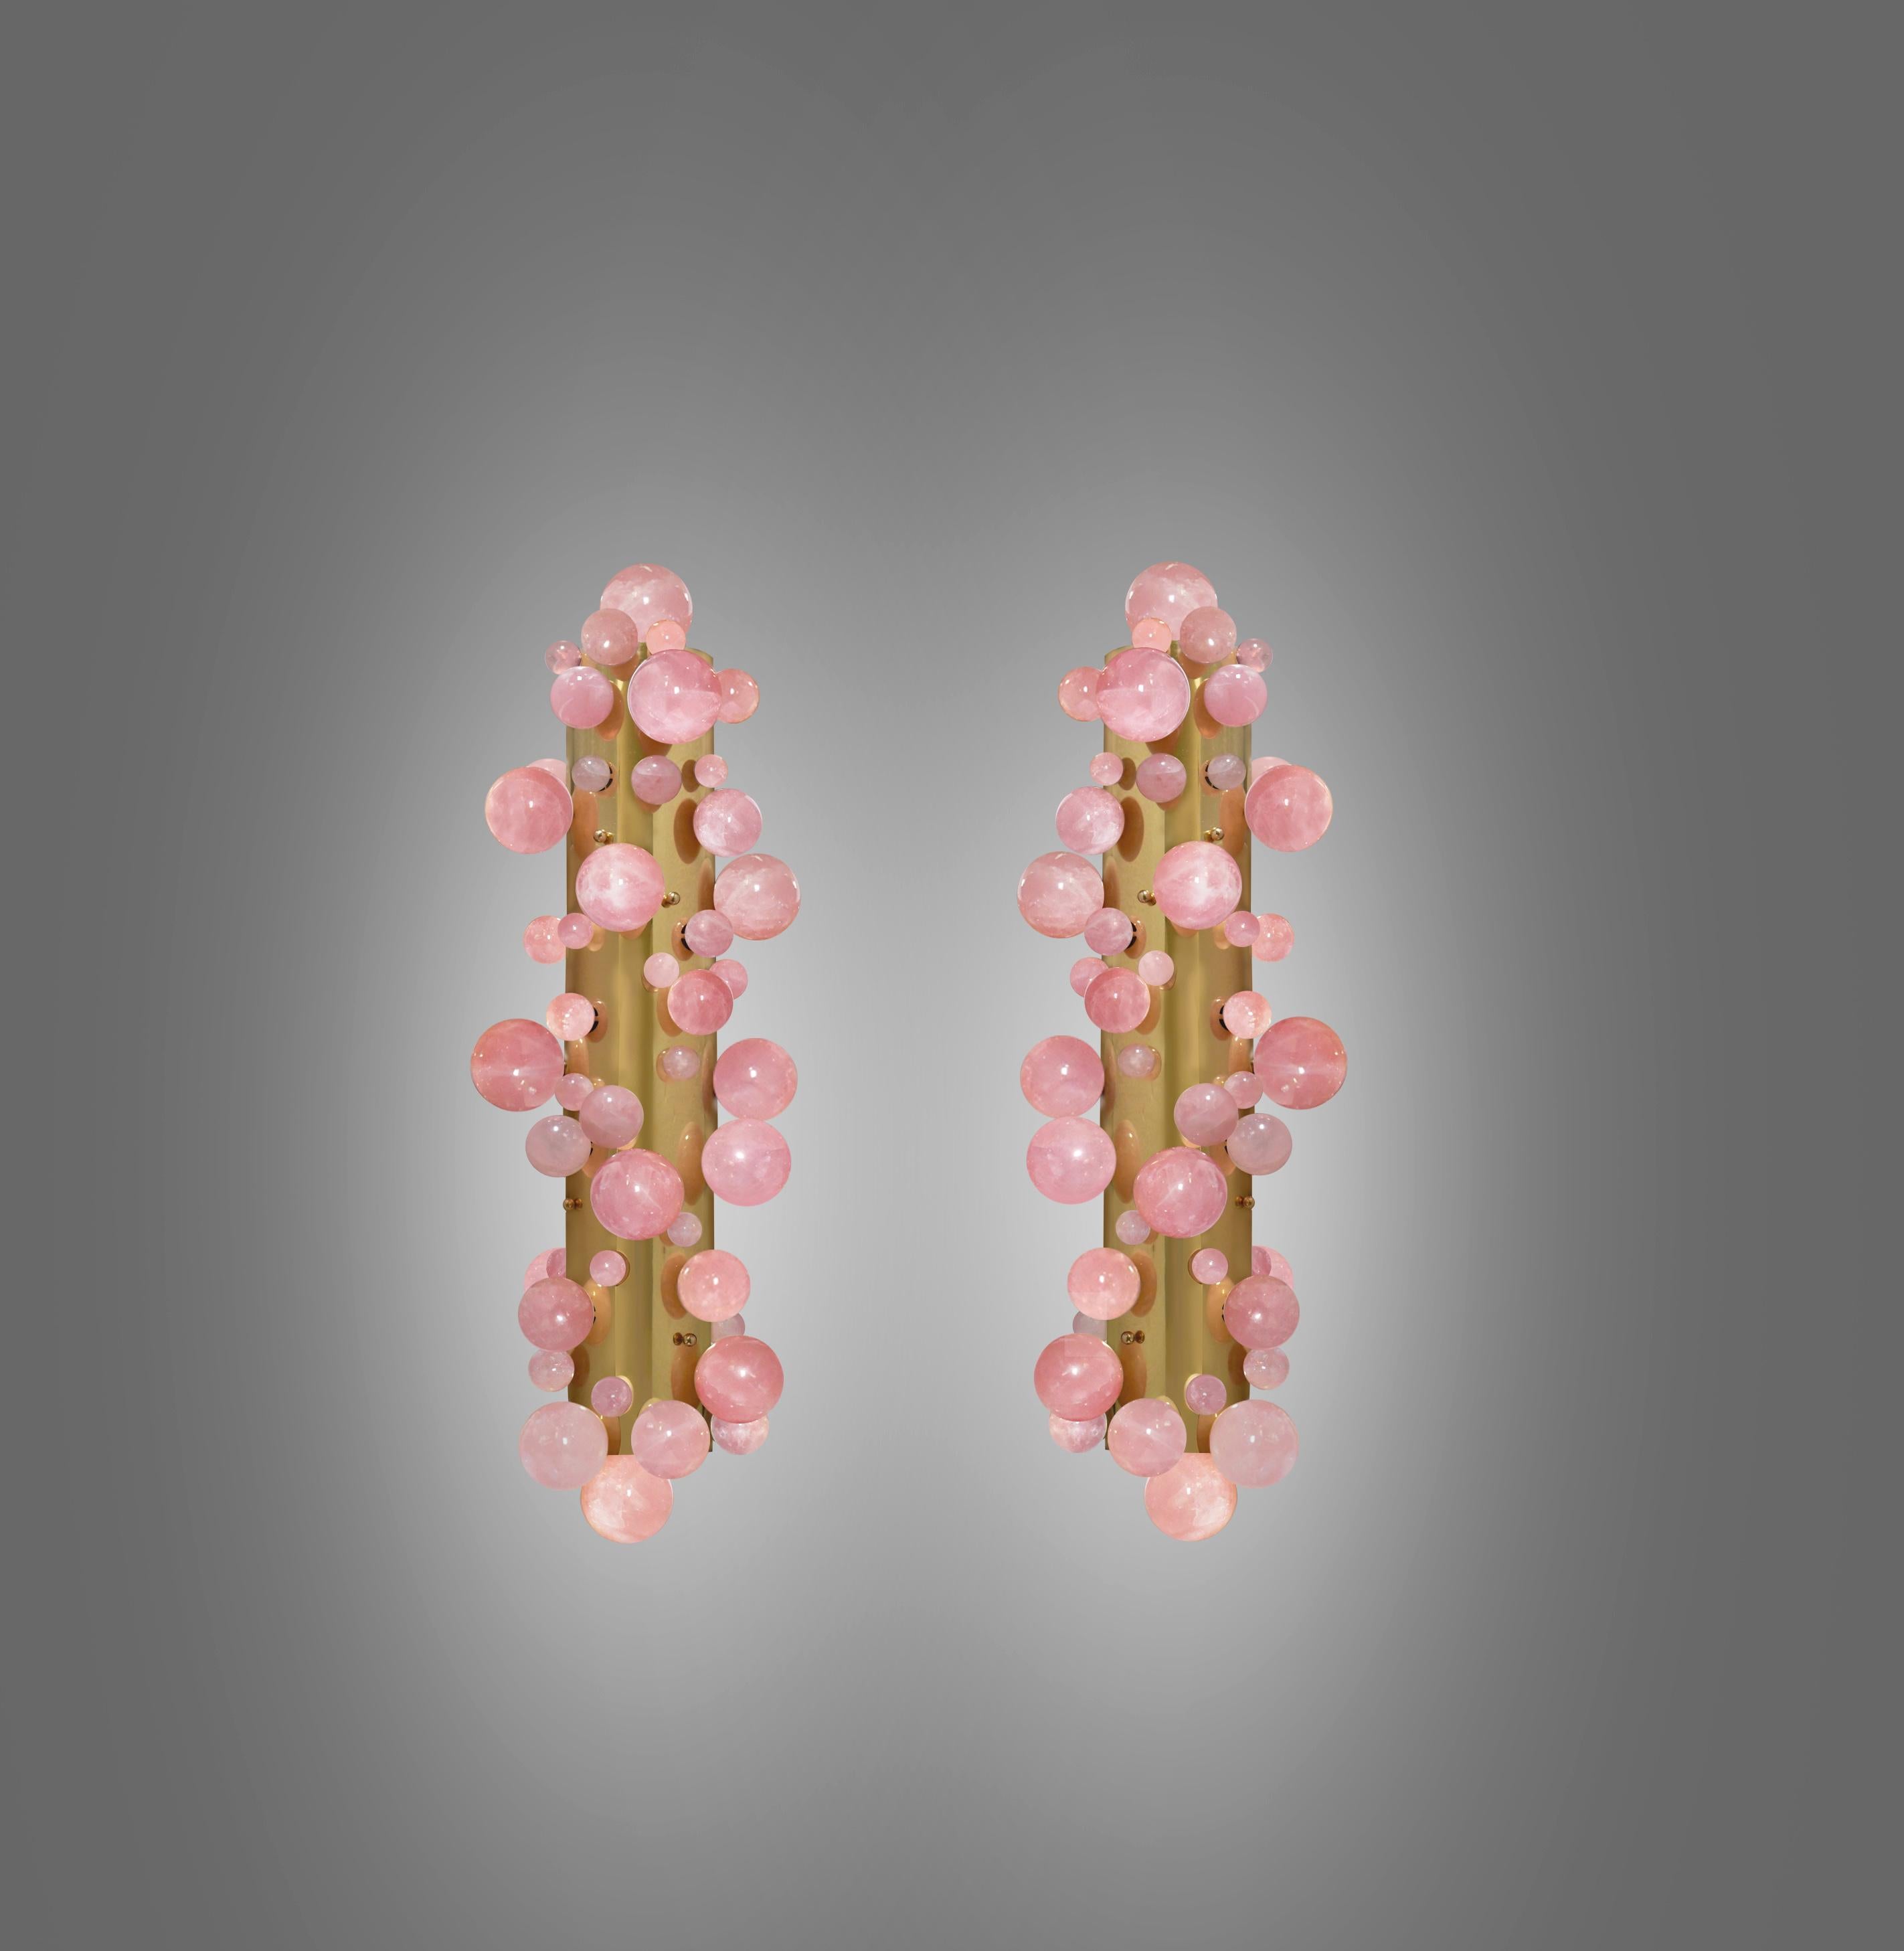 Pair of pink quartz bubble sconces with the polished brass finishes. Created by Phoenix gallery NYC.
Each sconce installed four sockets. Use four 60w LED warm light bulbs. Total 240w max. Light bulbs included.
Custom size and finish upon